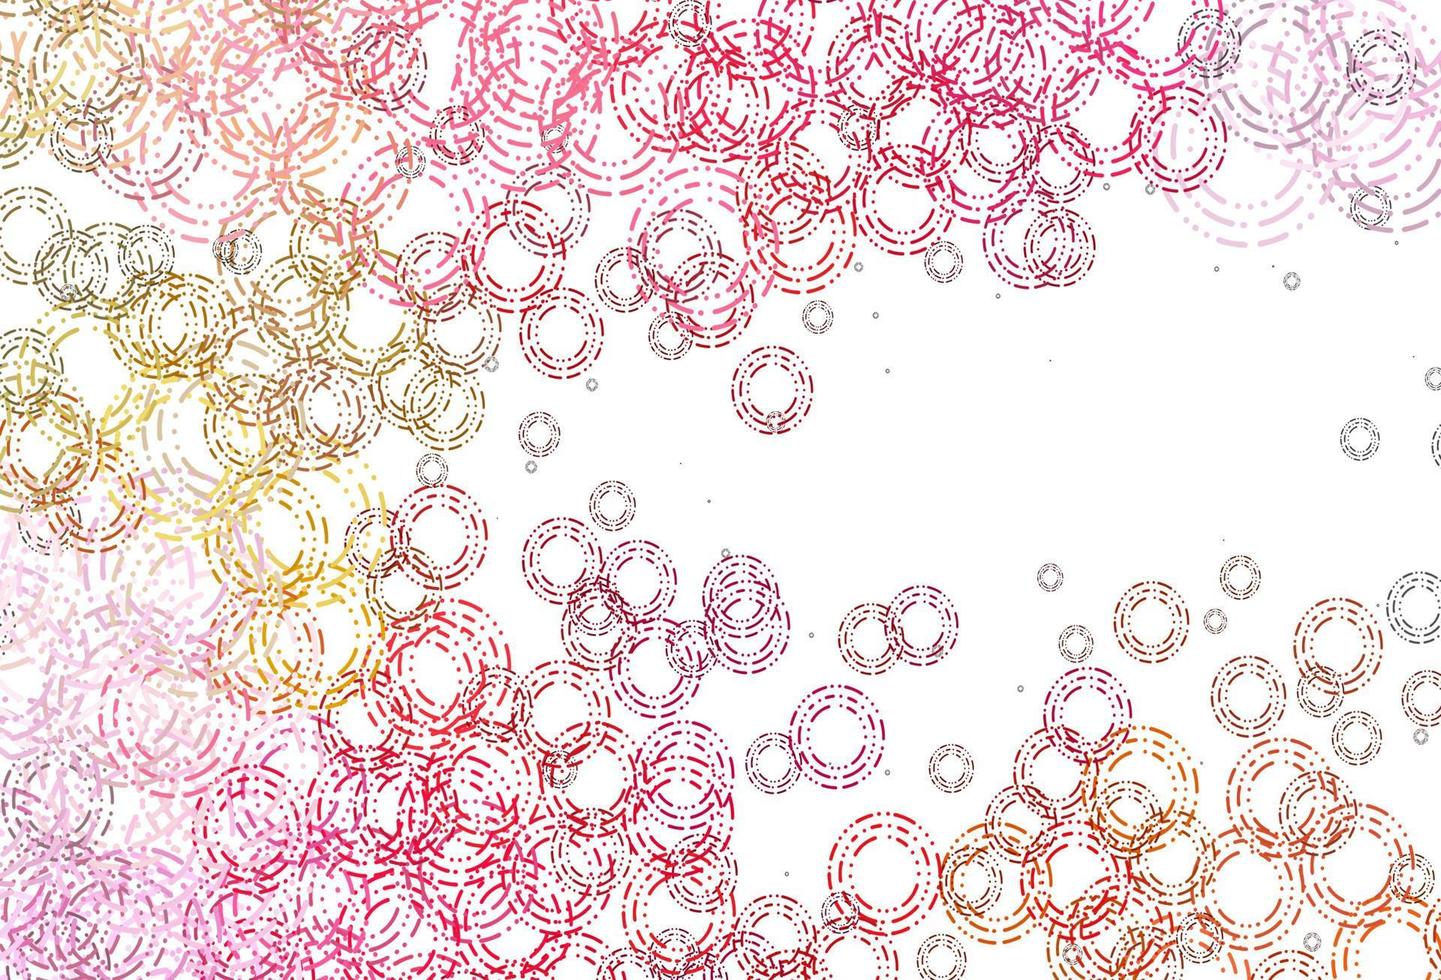 Light Red, Yellow vector template with circles.